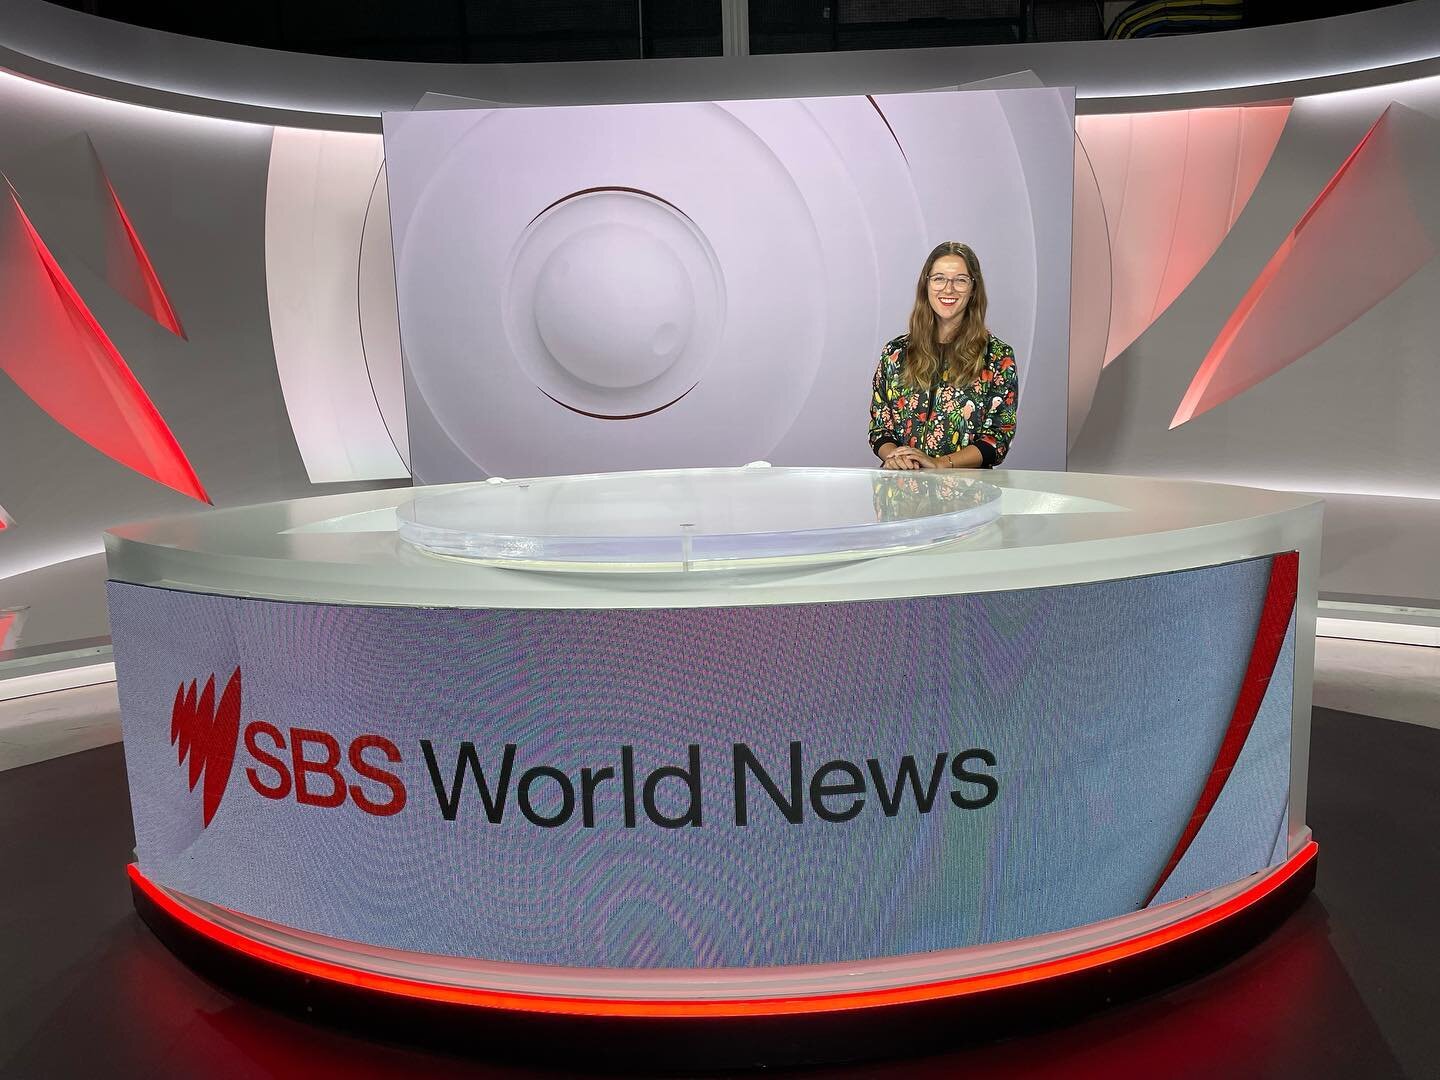 Coming to you live for you daily dinosaur update 🦖

Yesterday I had the privilege of doing another round of media training with the #superstarsofstem at @sbs_australia! We were able to question journalists about how we can get into the right room to